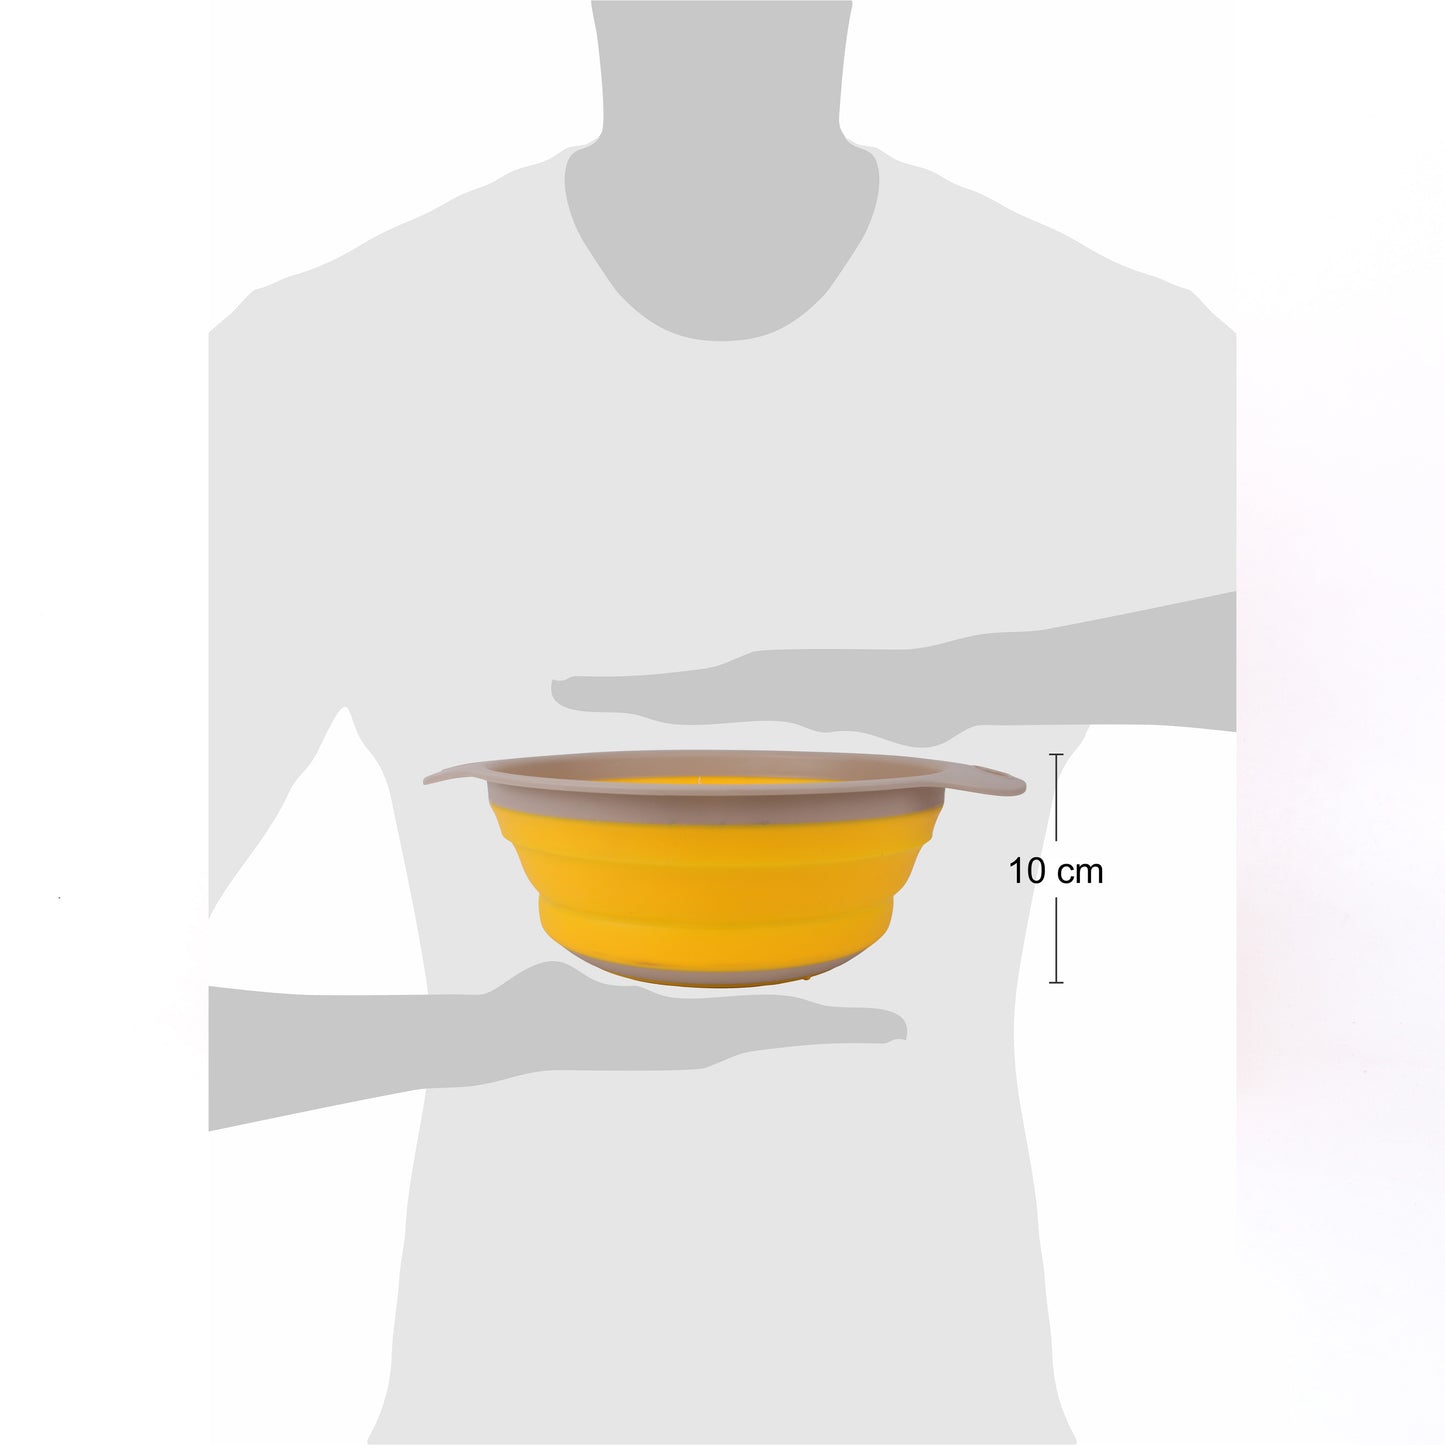 Classy Touch - 10"Strainer Silicone Collapsible Colander and Strainer with Handle Yellow - Ghar Sajawat